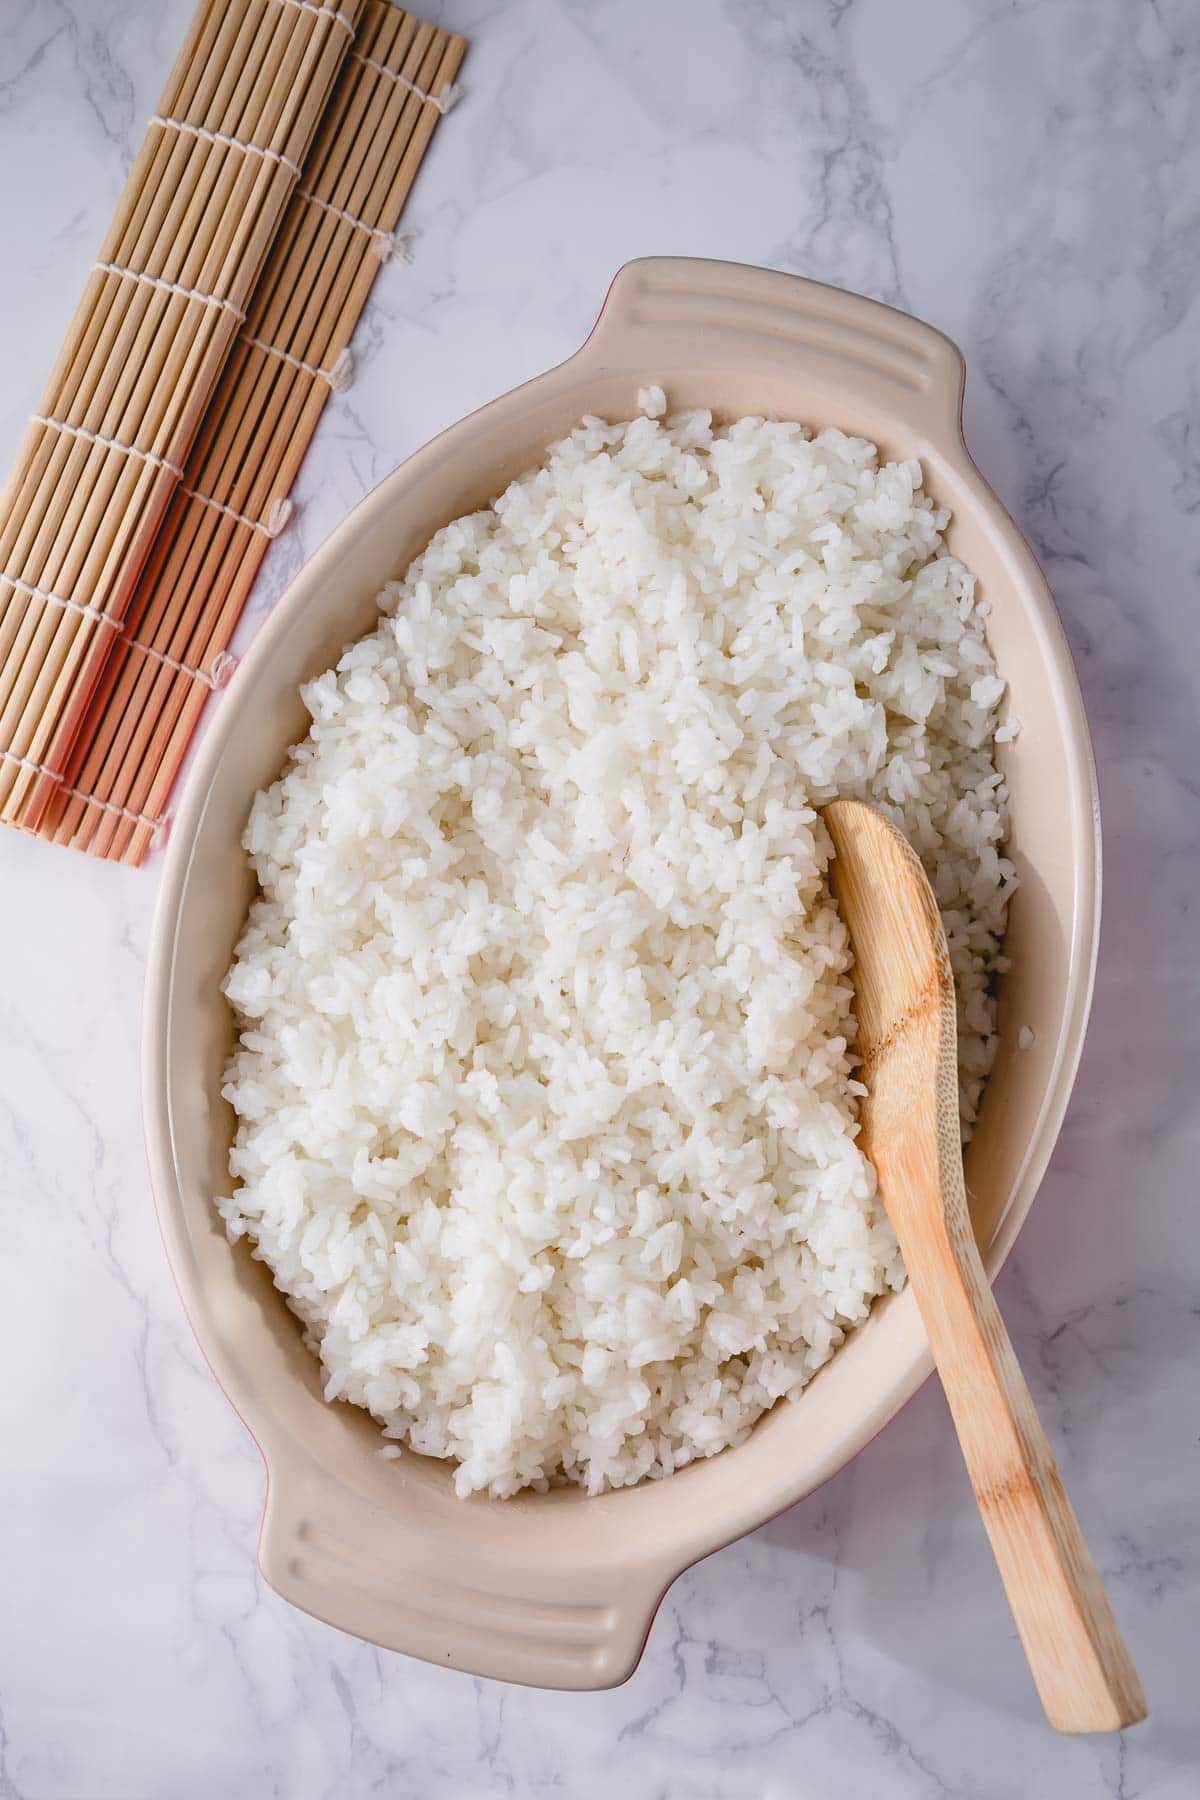 How to Make Sushi Rice